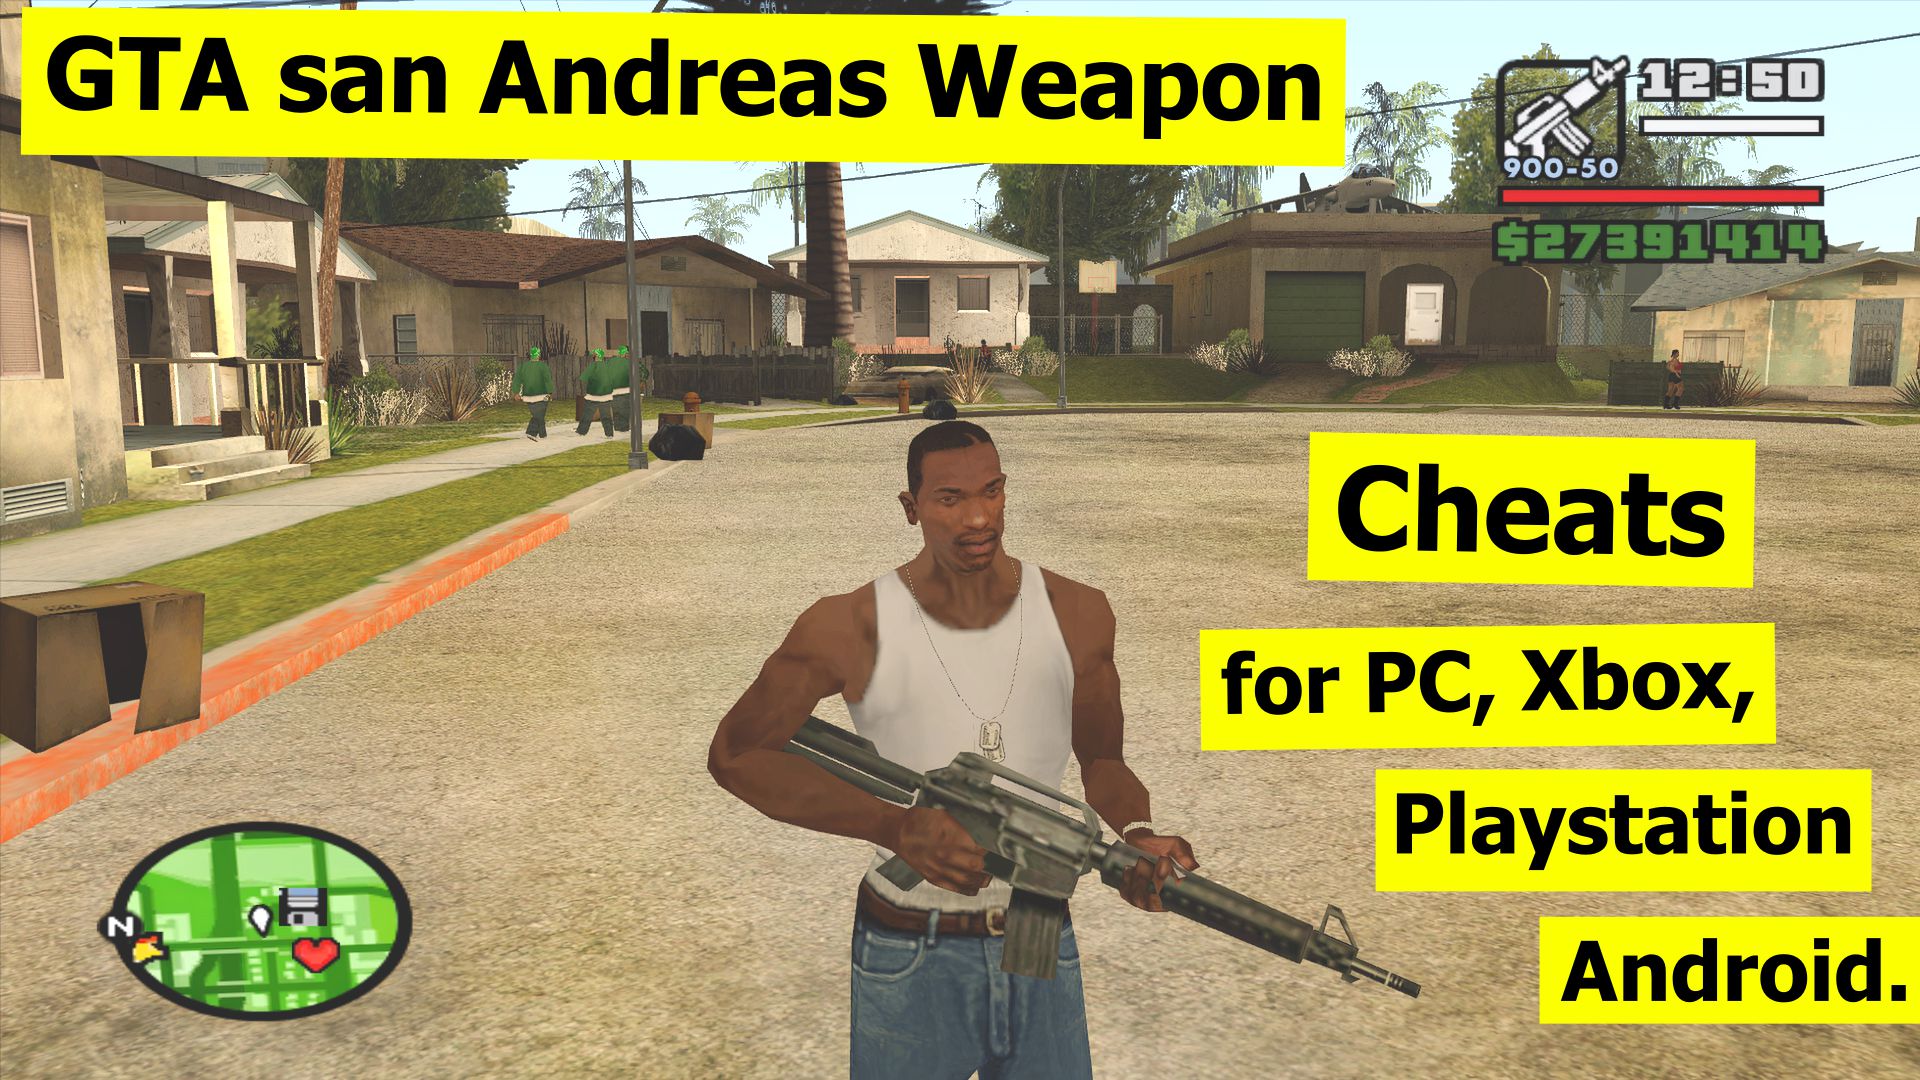 GTA San Andreas weapon cheats for PC, Xbox, Playstation, Android